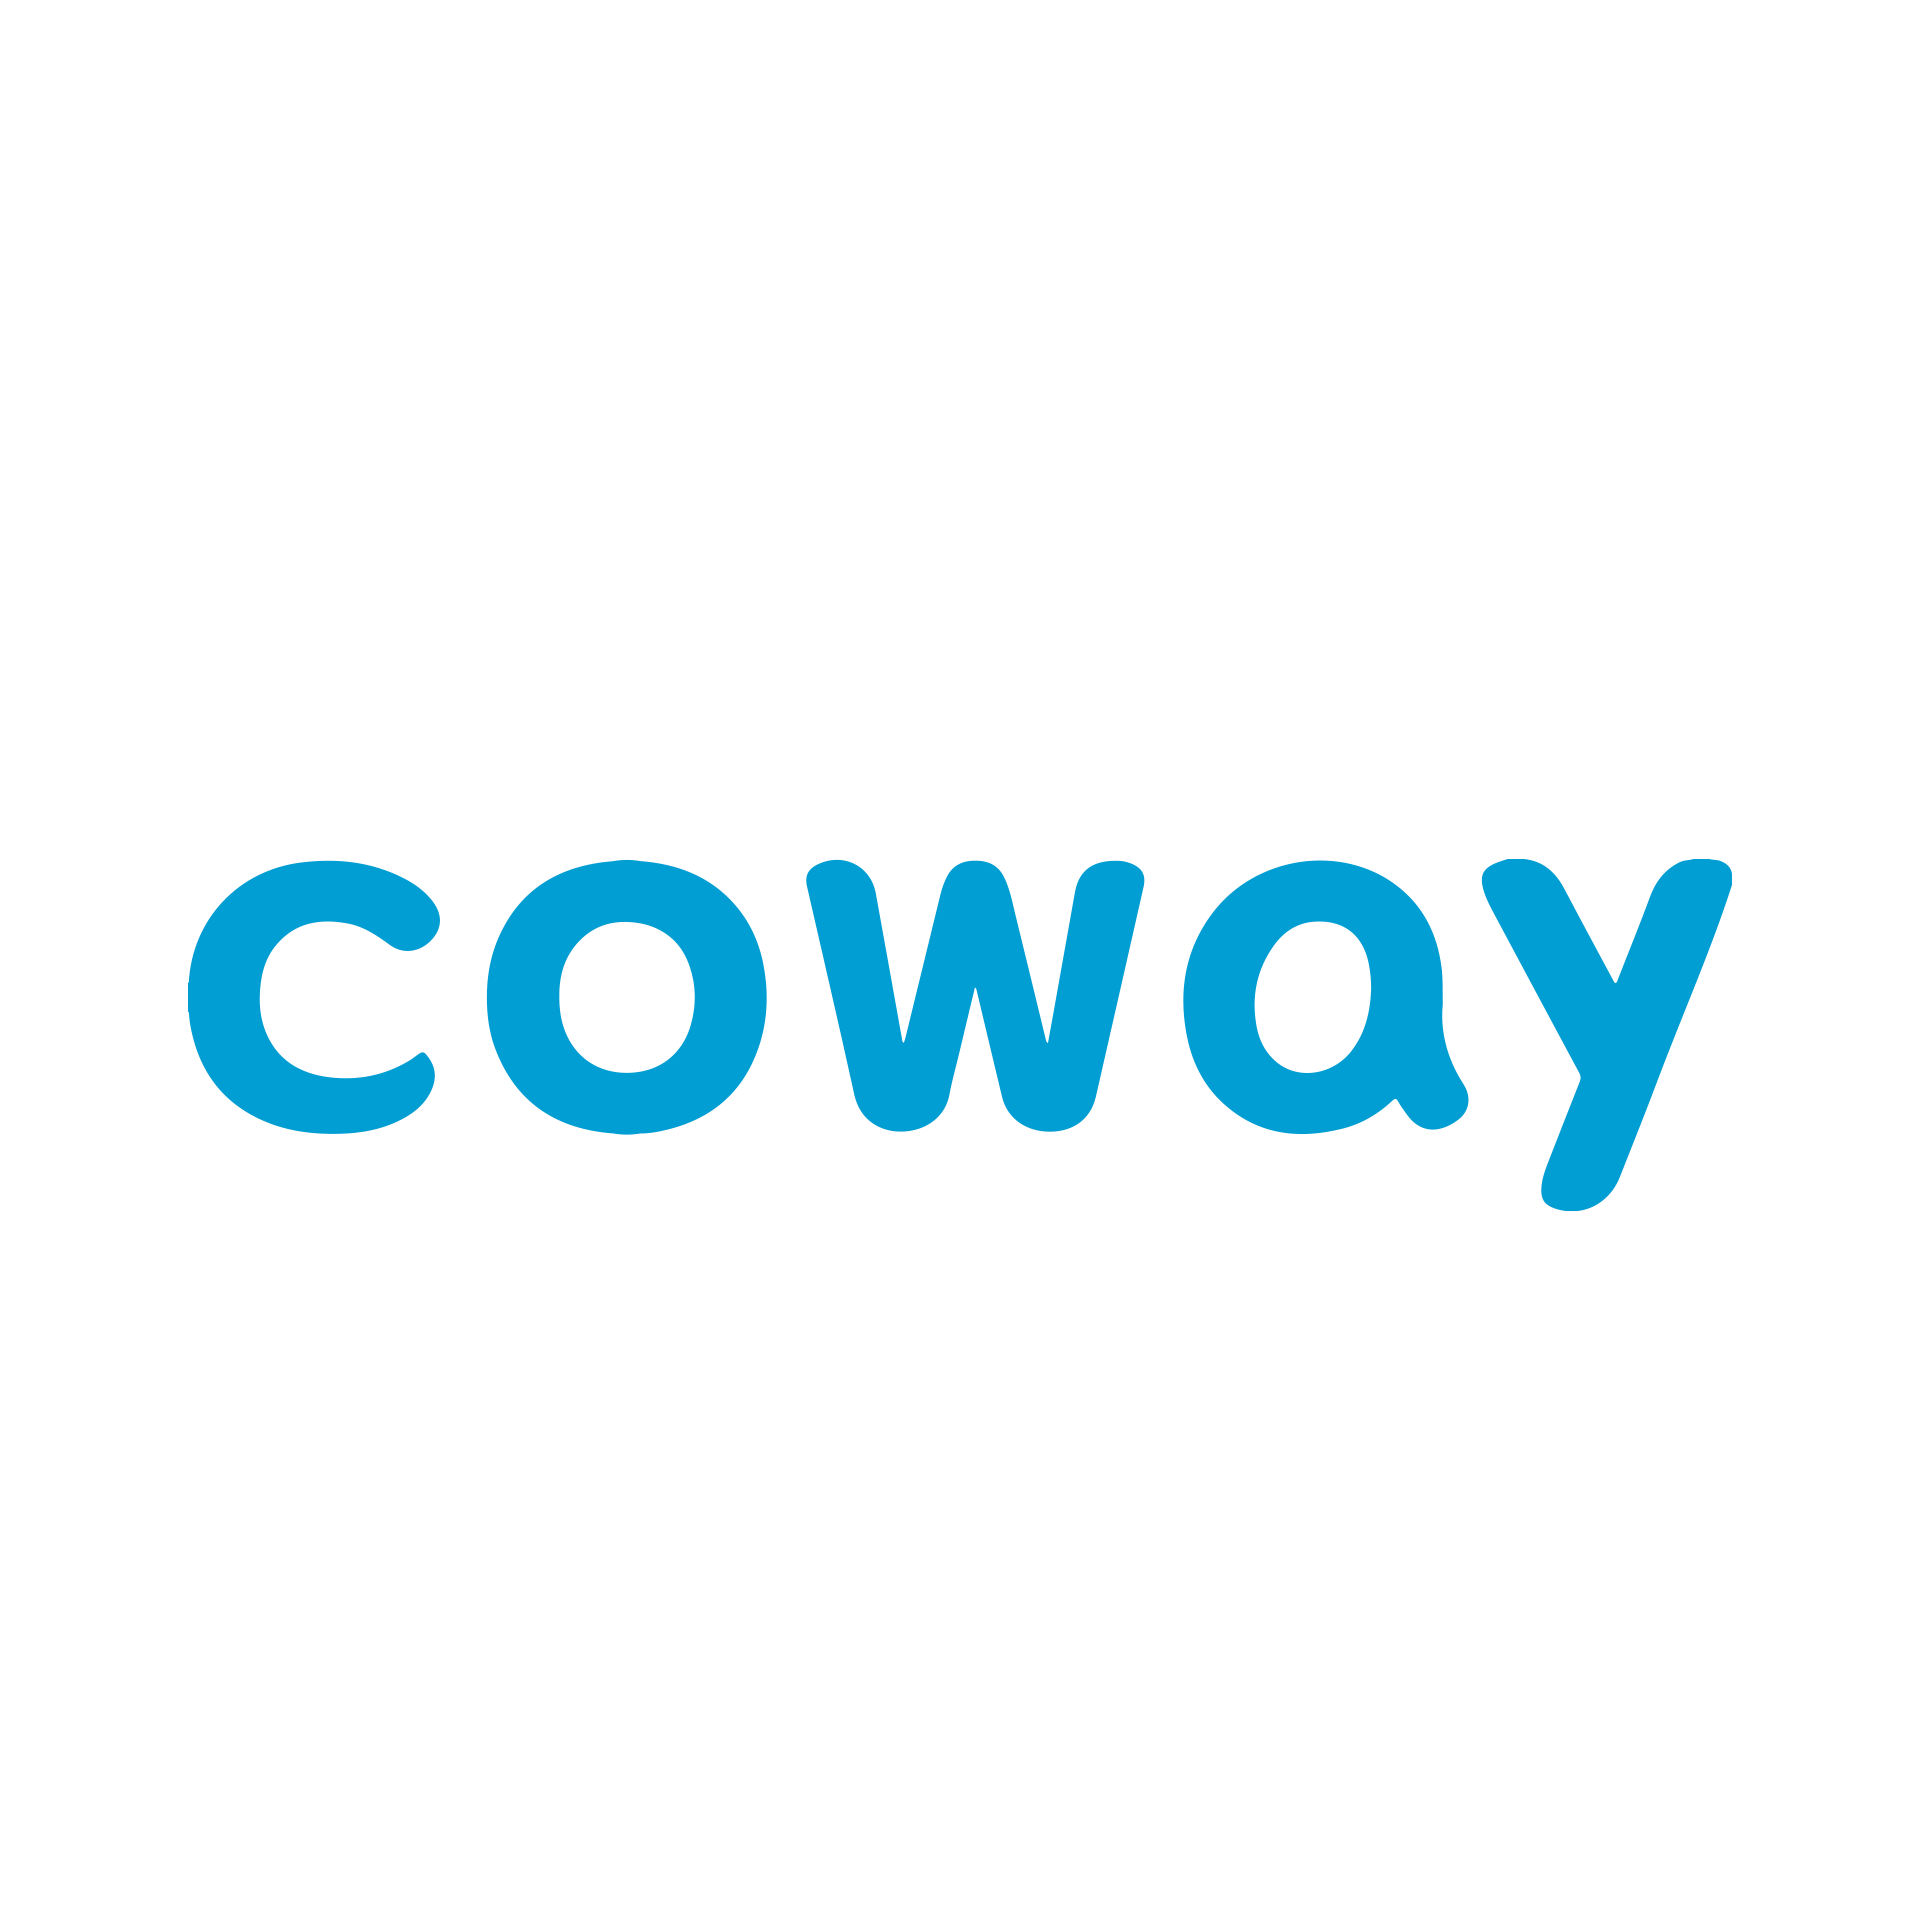 coway 썸네일